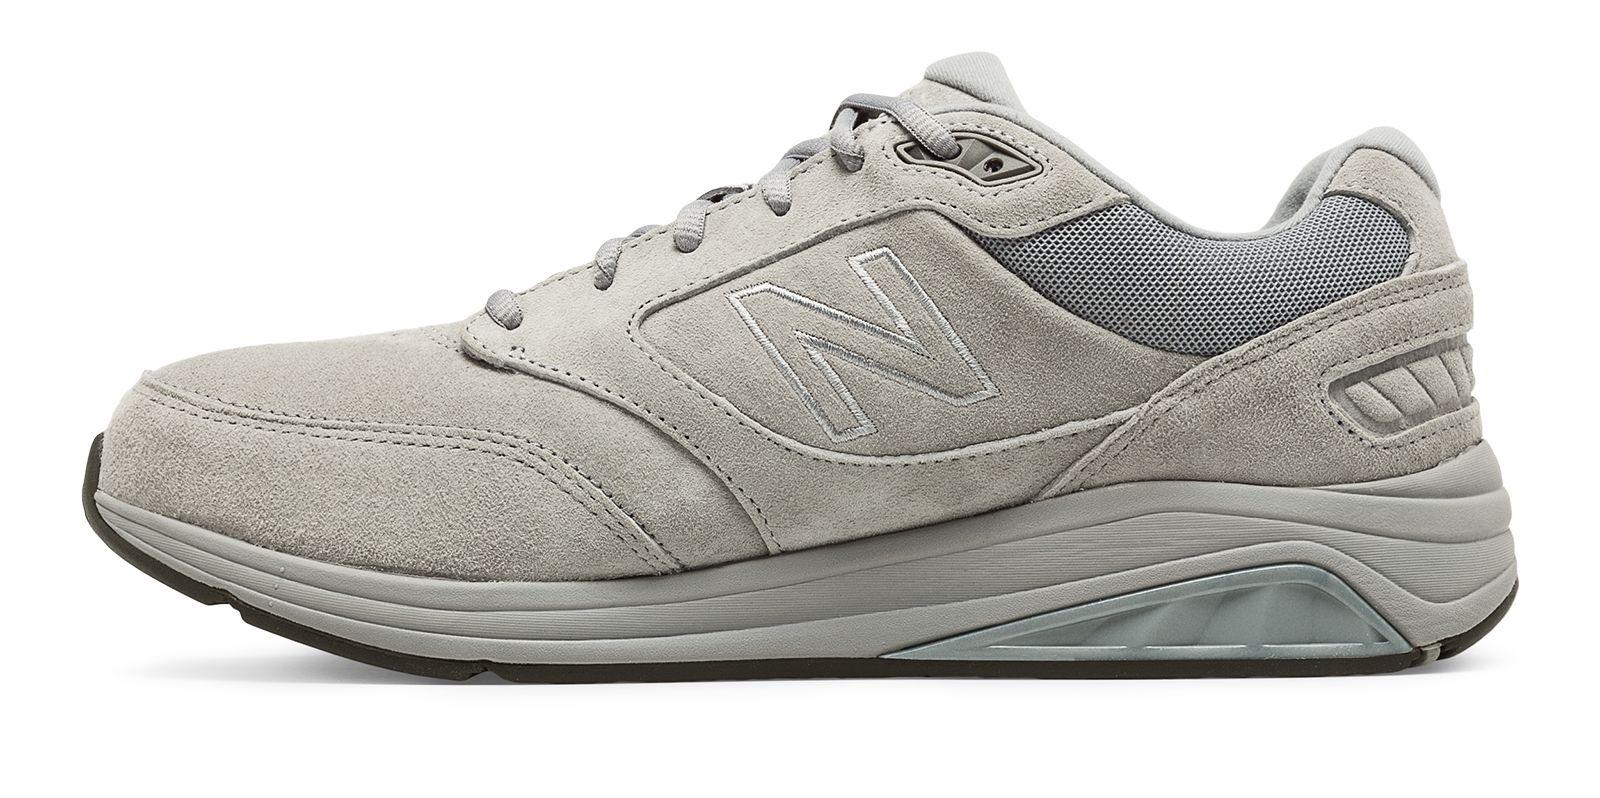 New Balance Suede 928v3 in Light Grey (Gray) for Men - Save 3% - Lyst